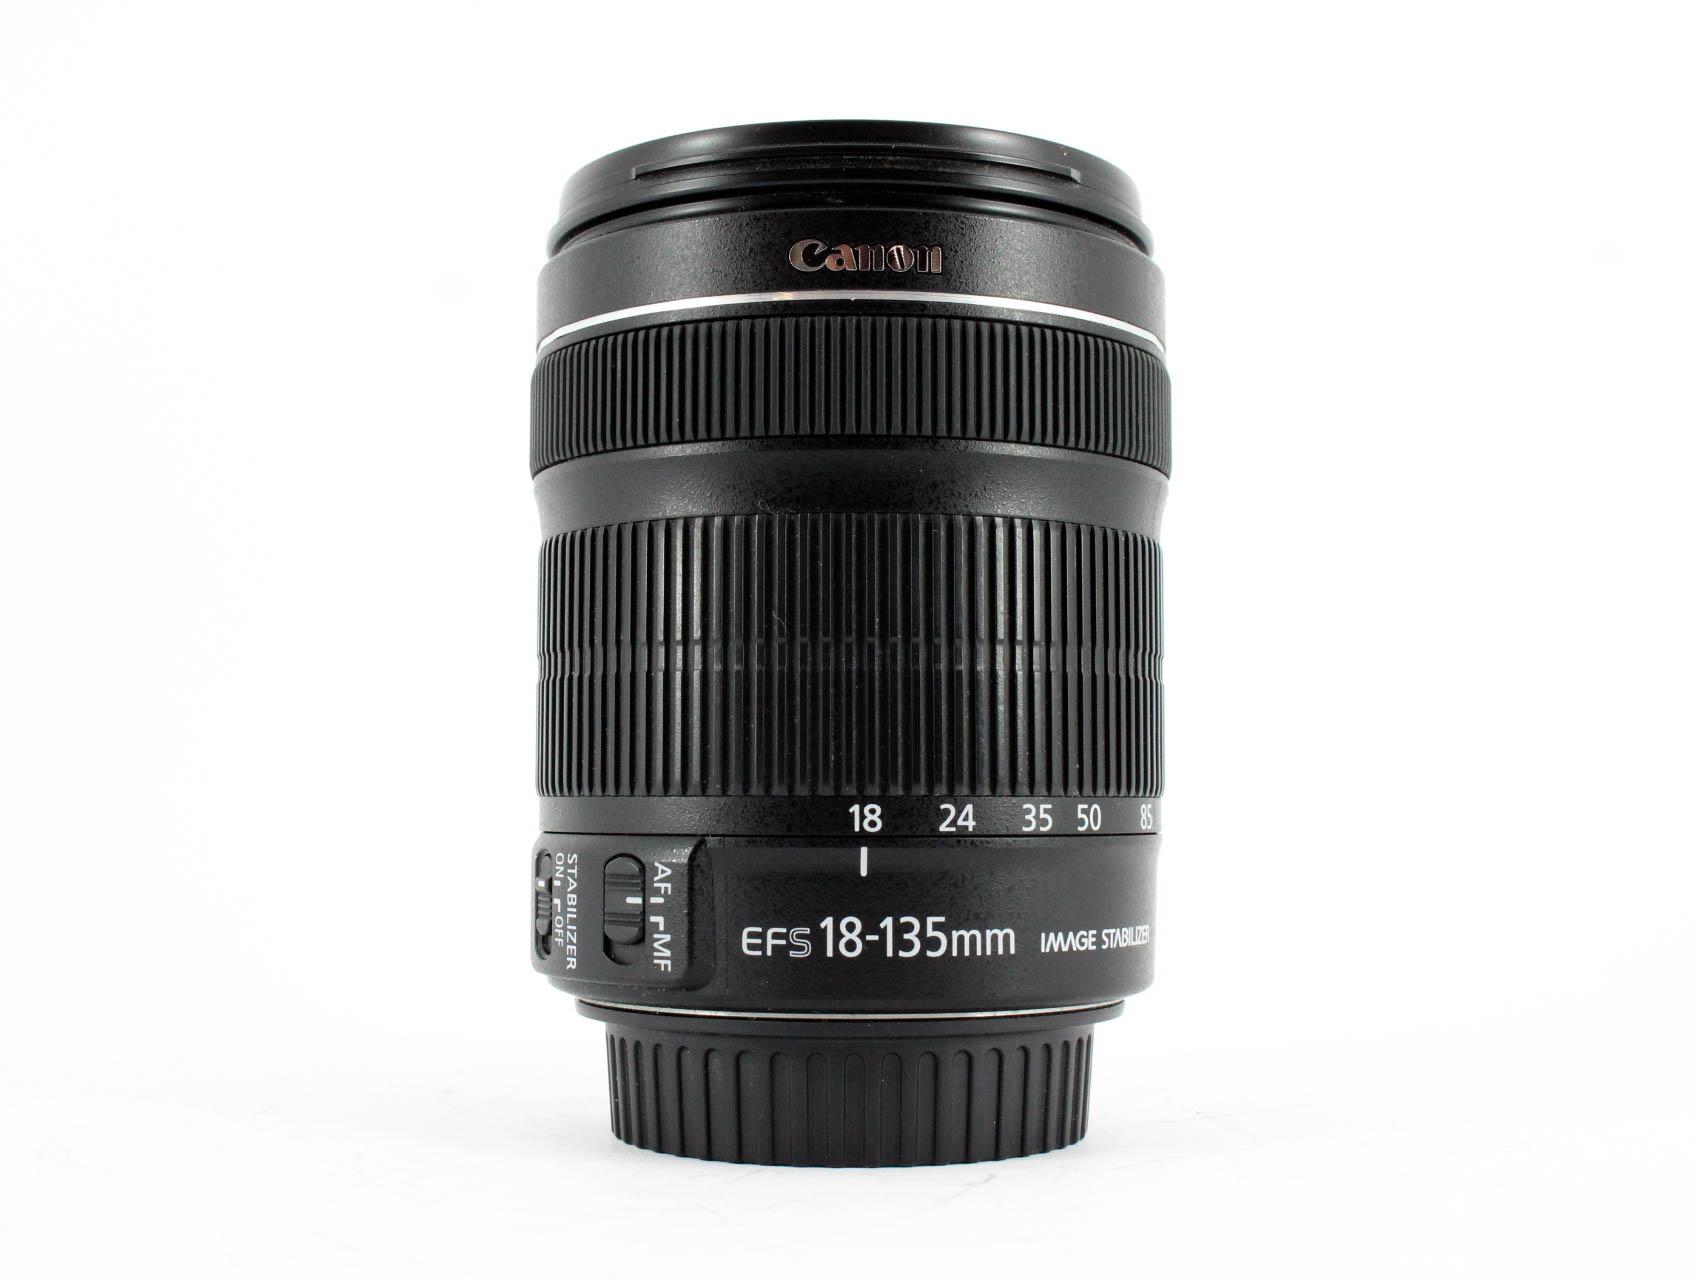 Canon EF-S 18-135mm f/3.5-5.6 IS STM Lens - Lenses and Cameras